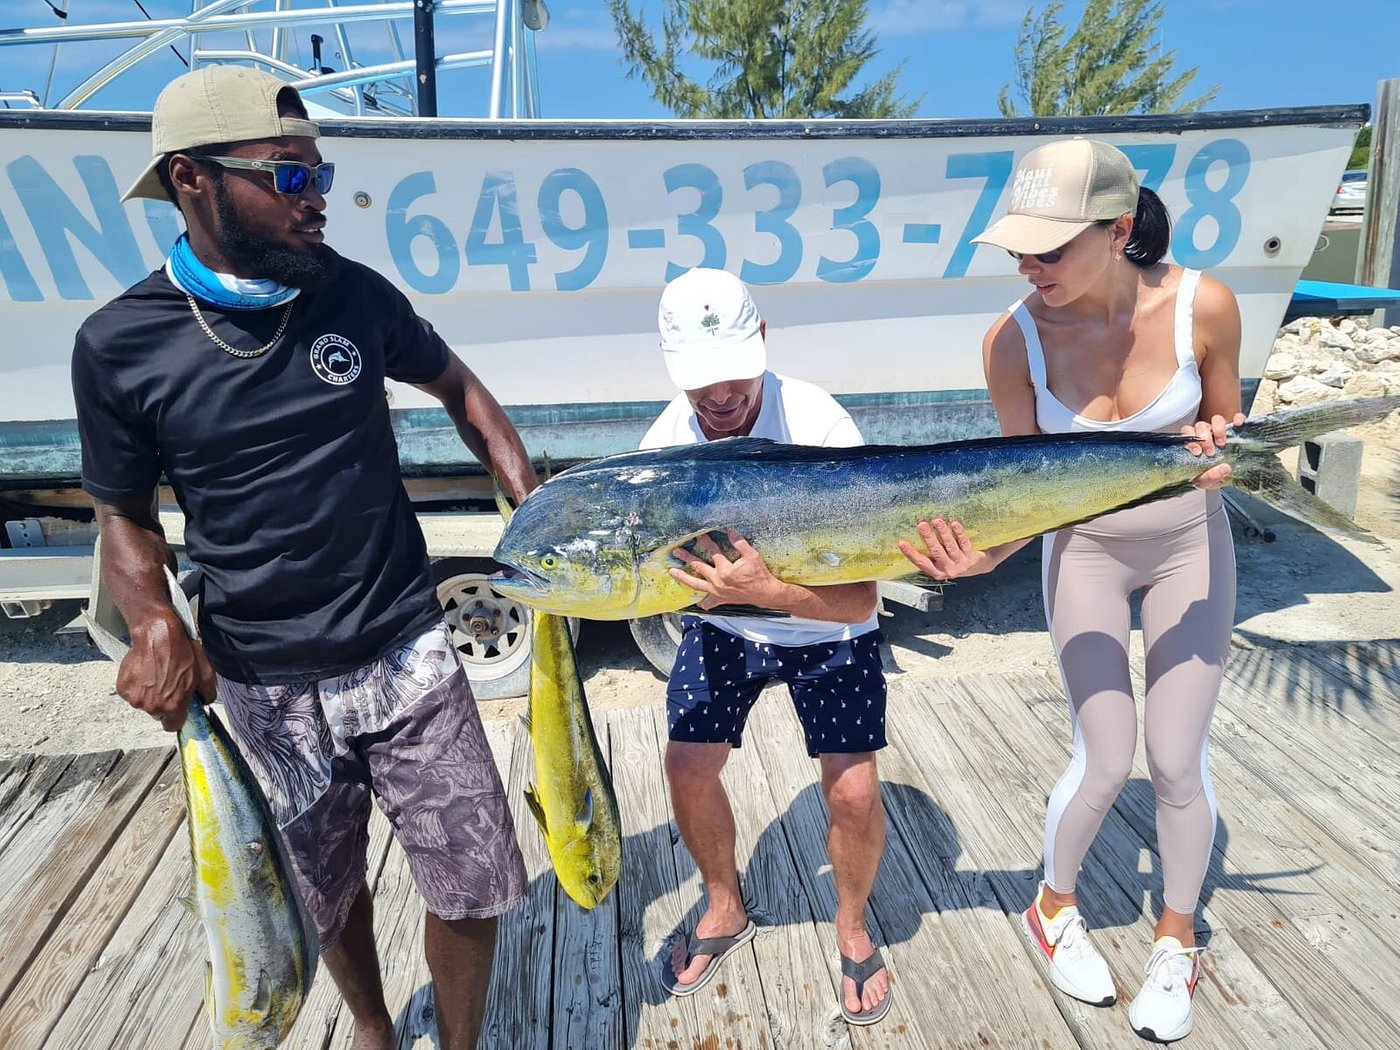 Private Reef Fishing Tour in Providenciales